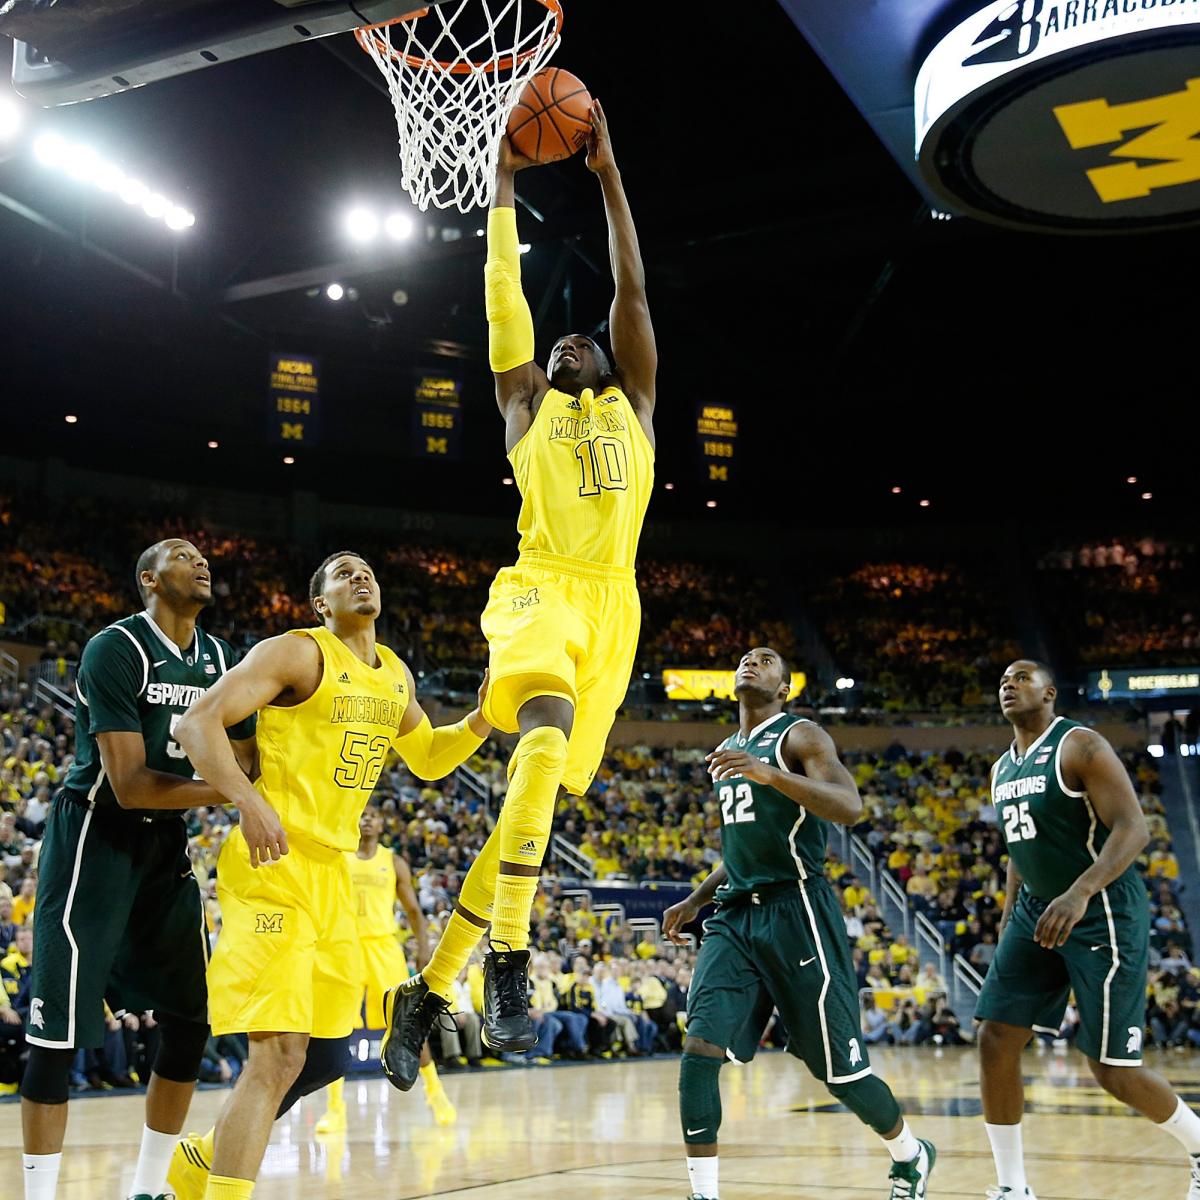 Michigan's Win over Michigan State Proves Ability to Succeed in March